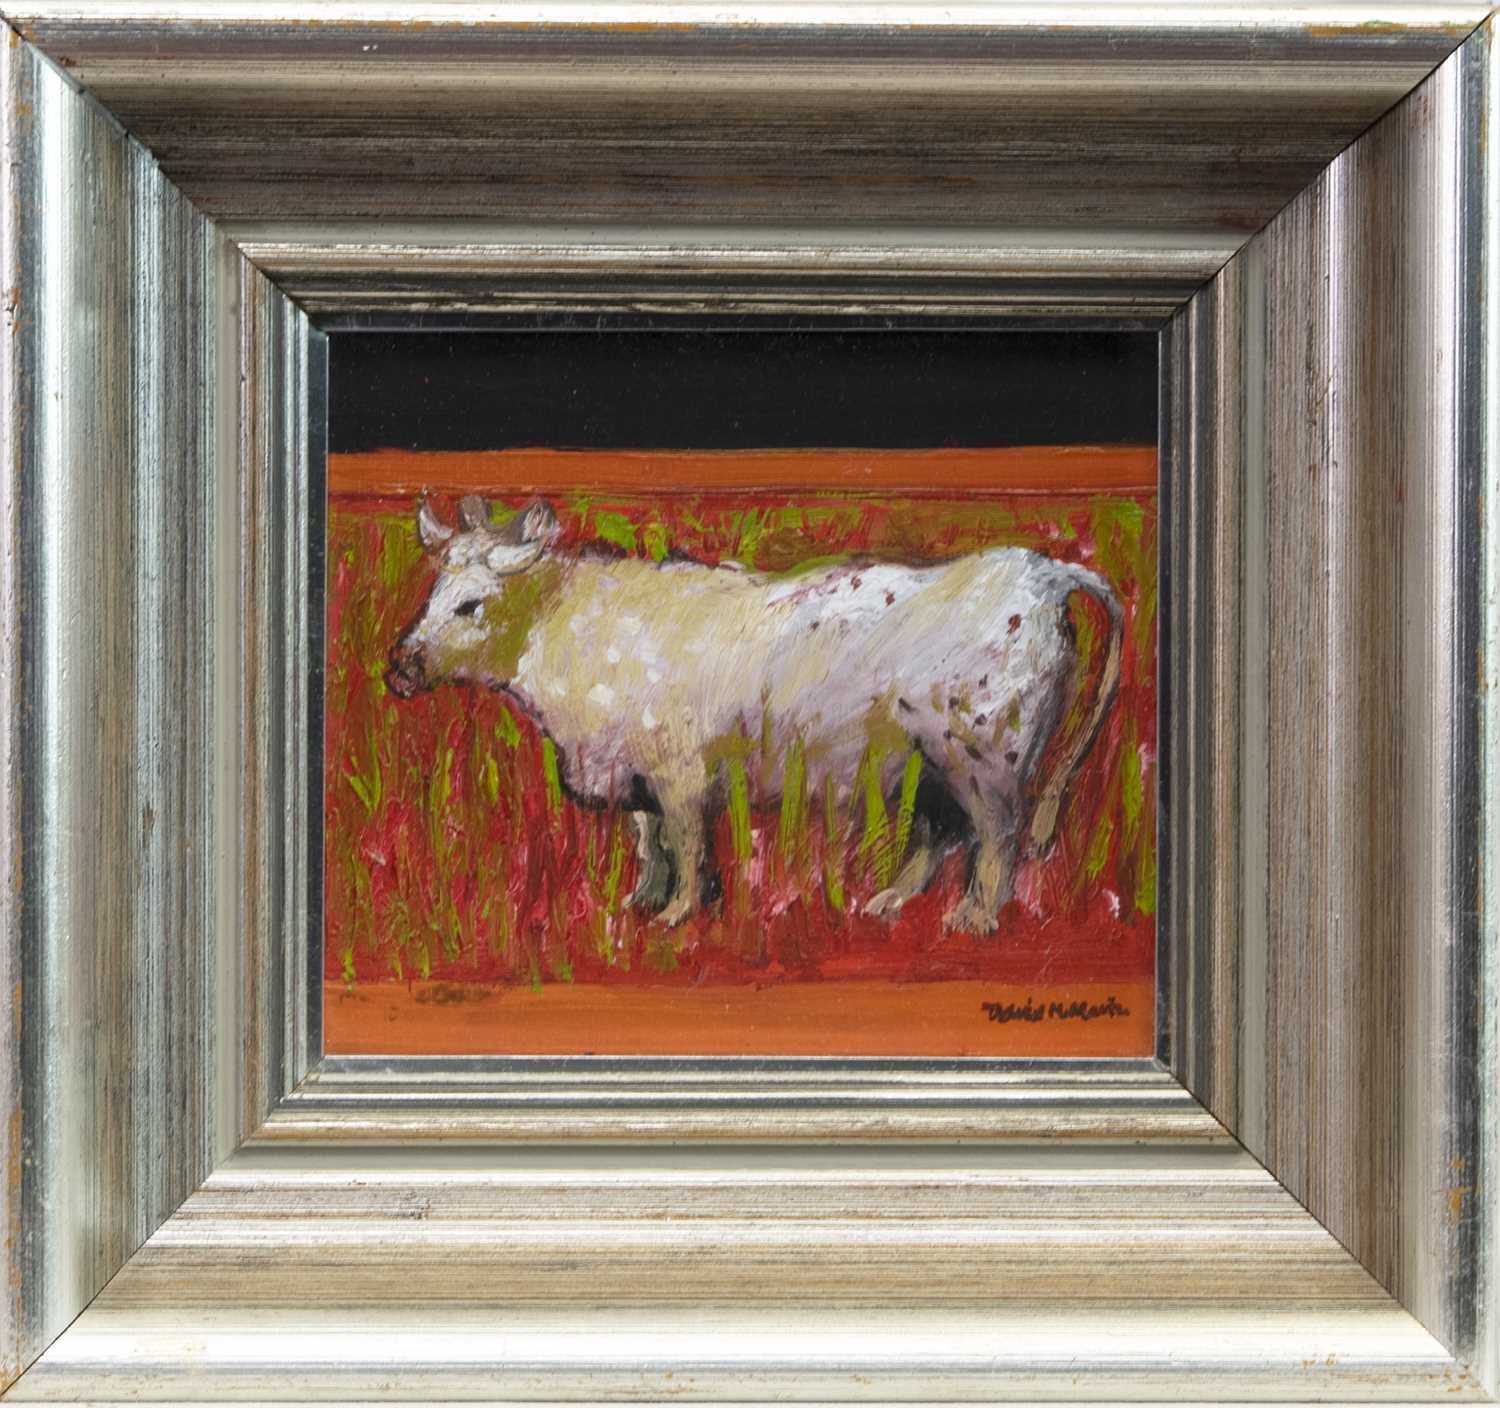 Lot 519 - YOUNG BULL, AN OIL BY DAVID MCLEOD MARTIN